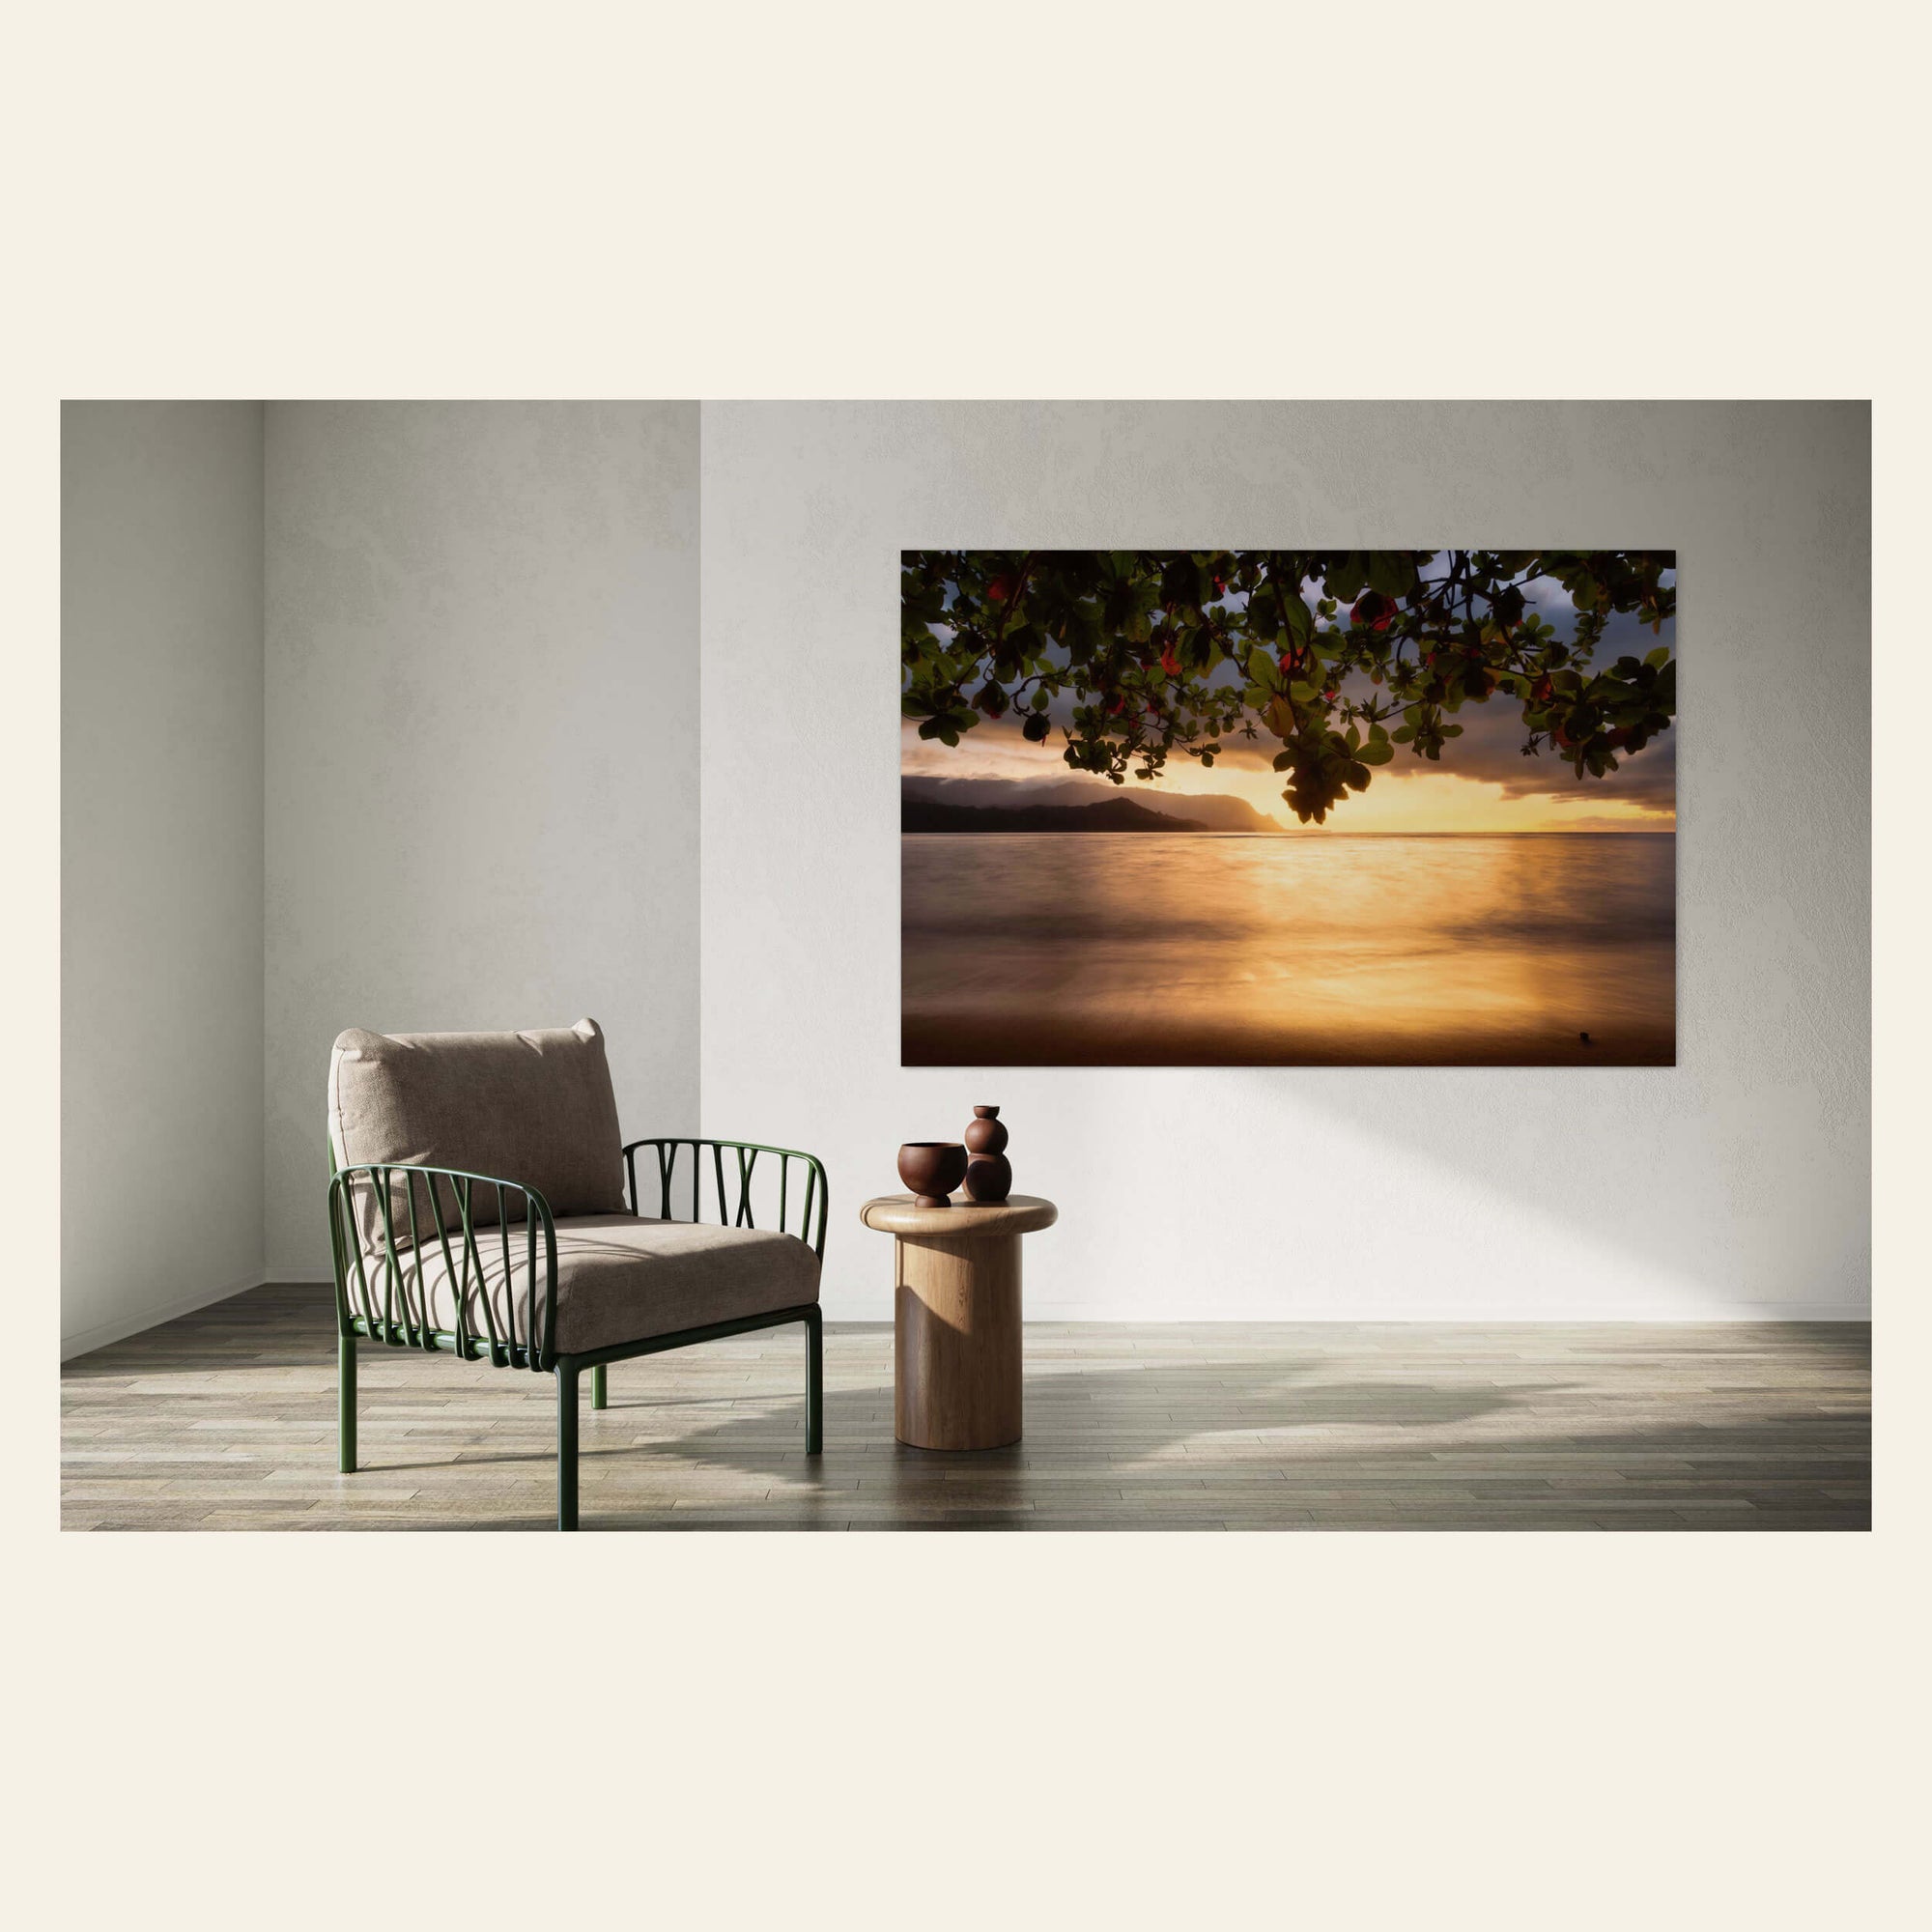 A picture of Pu'u Poa Beach at the Hanalei Bay Resort in Kauai hangs in a living room.